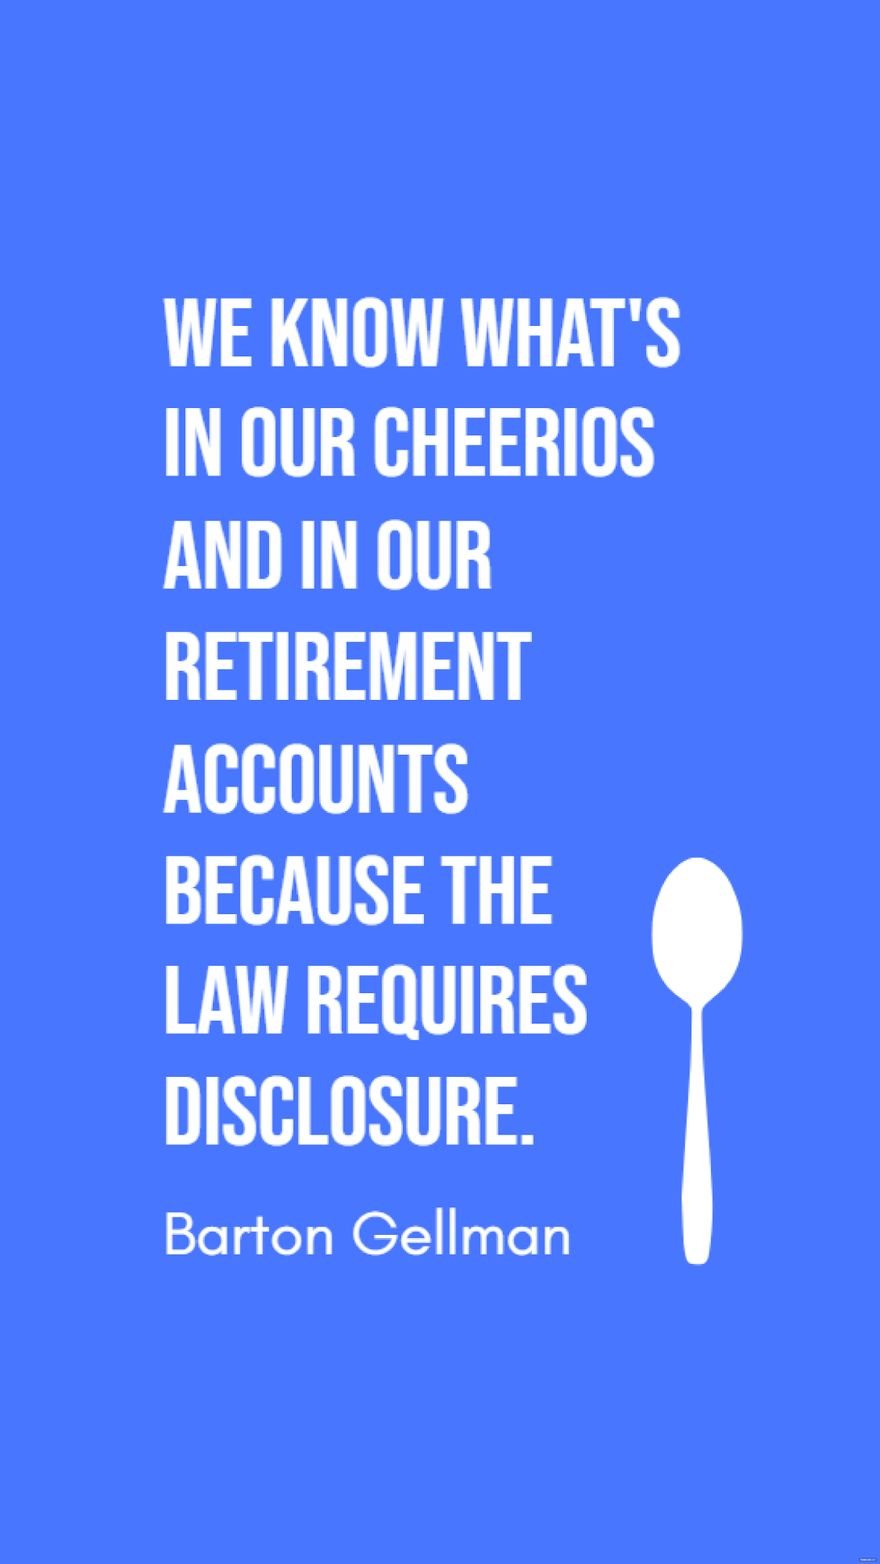 Barton Gellman - We know what's in our Cheerios and in our retirement accounts because the law requires disclosure.